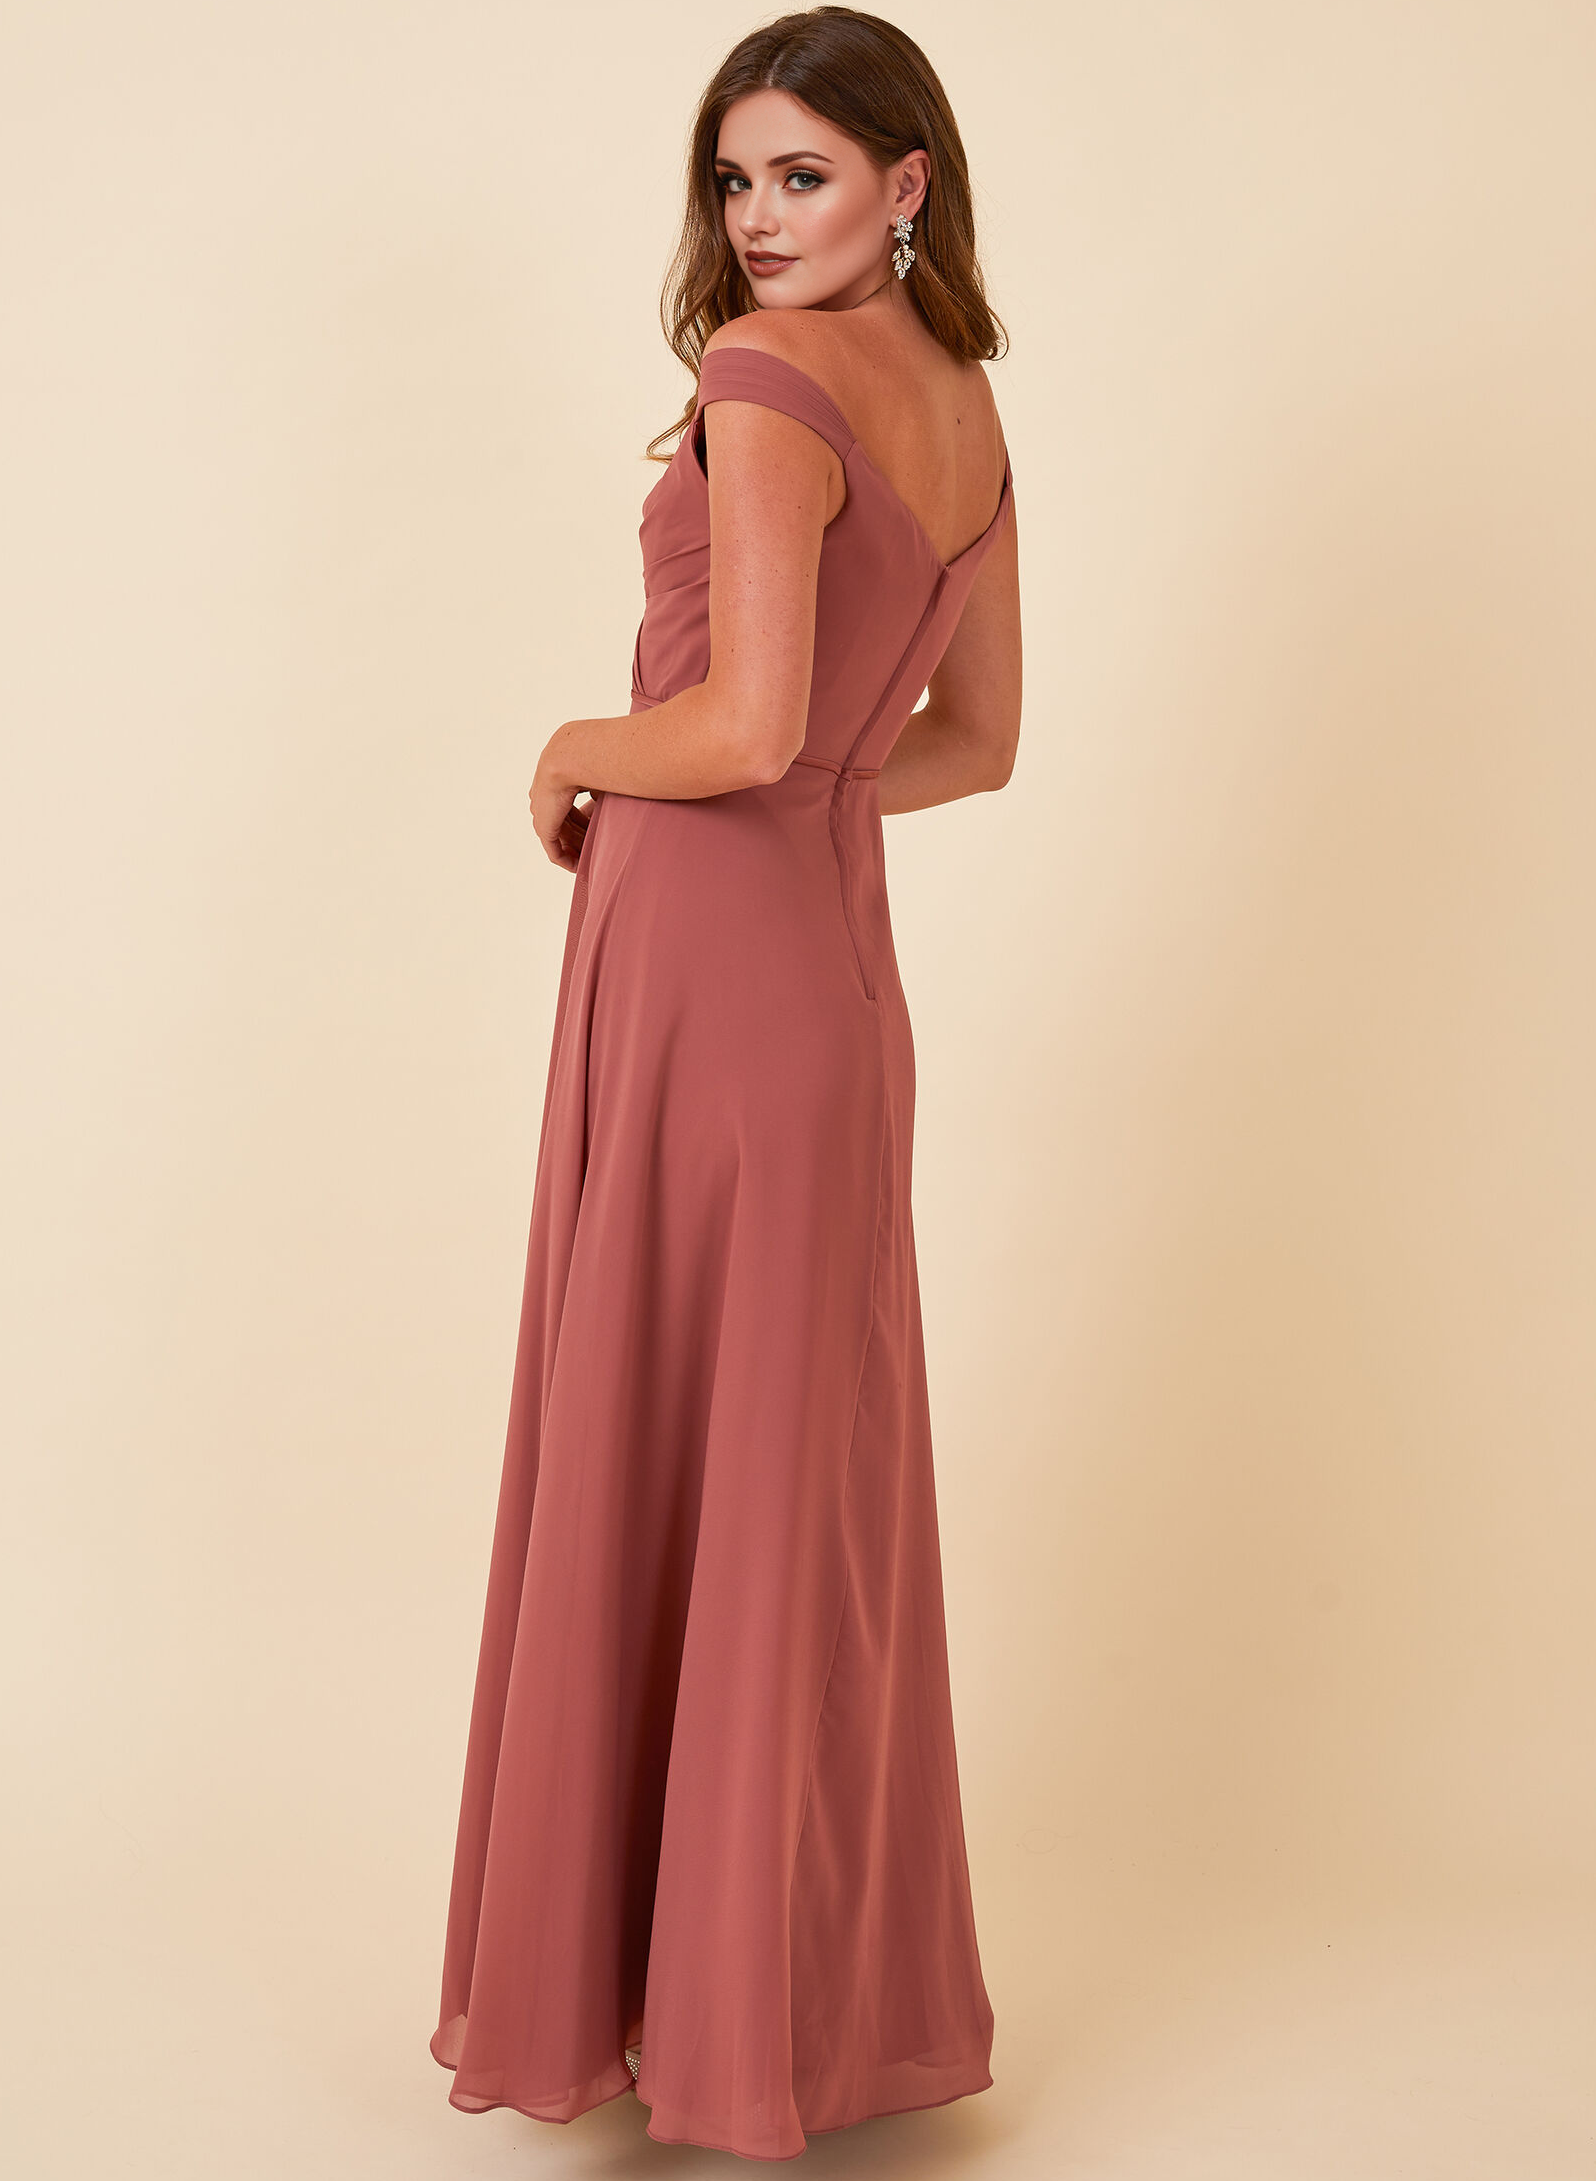 A-Line Rose Off-The-Shoulder Bridesmaid Dresses With Chiffon